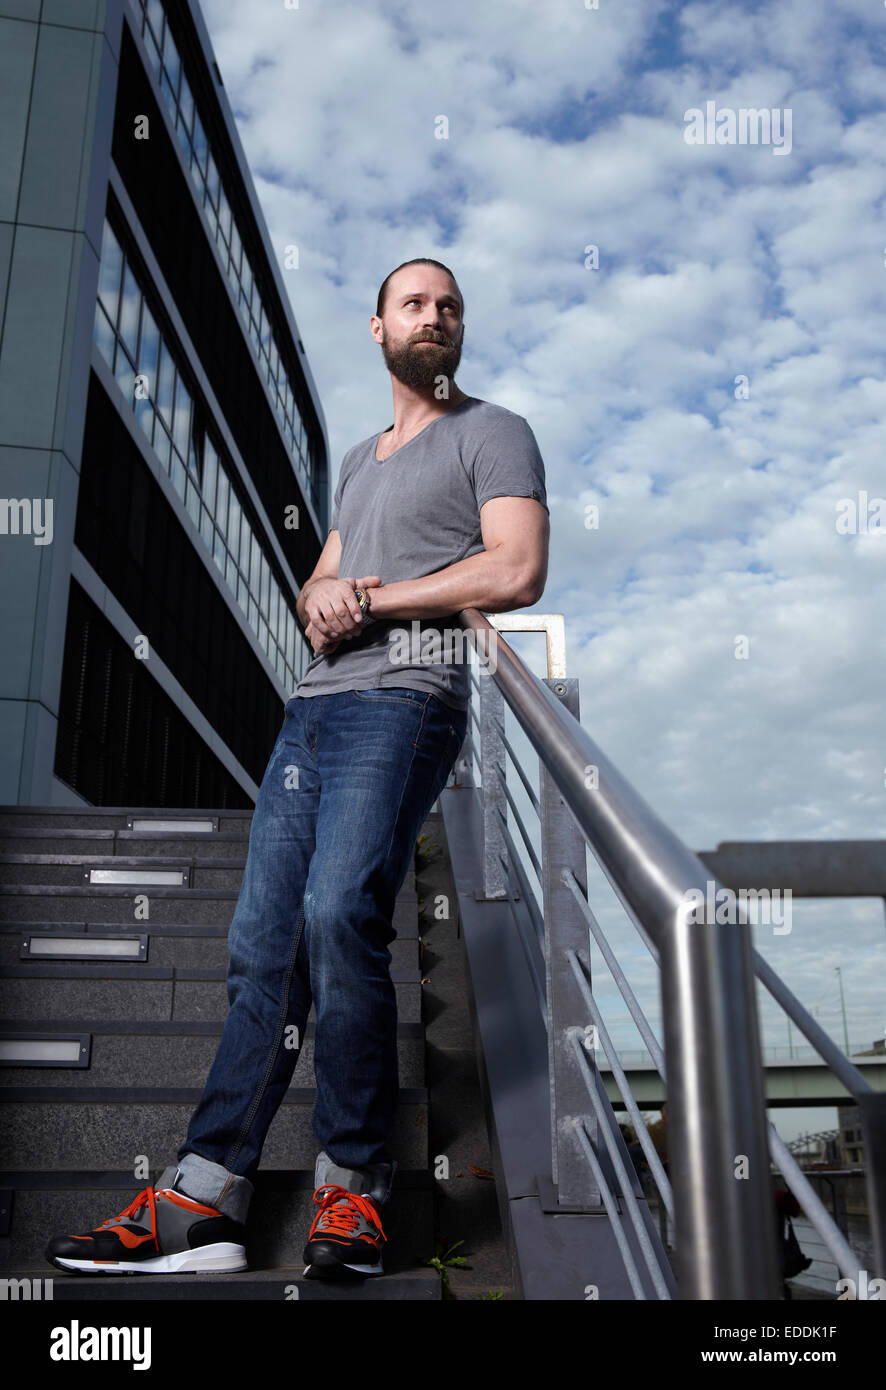 Portrait of man with full beard leaning on railing Stock Photo